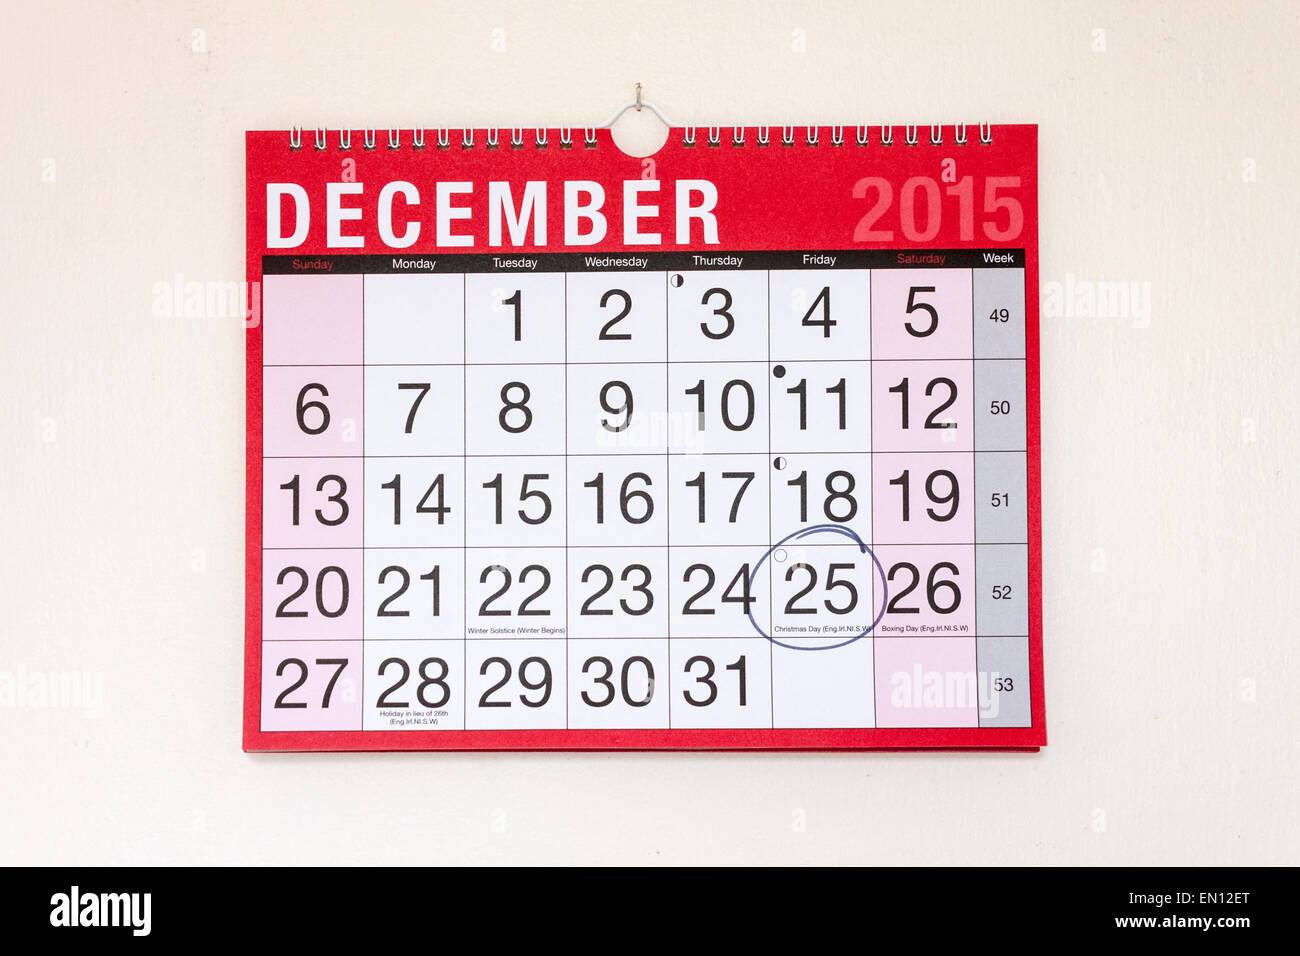 Monthly wall calendar December 2015, Christmas Day circled Stock Photo